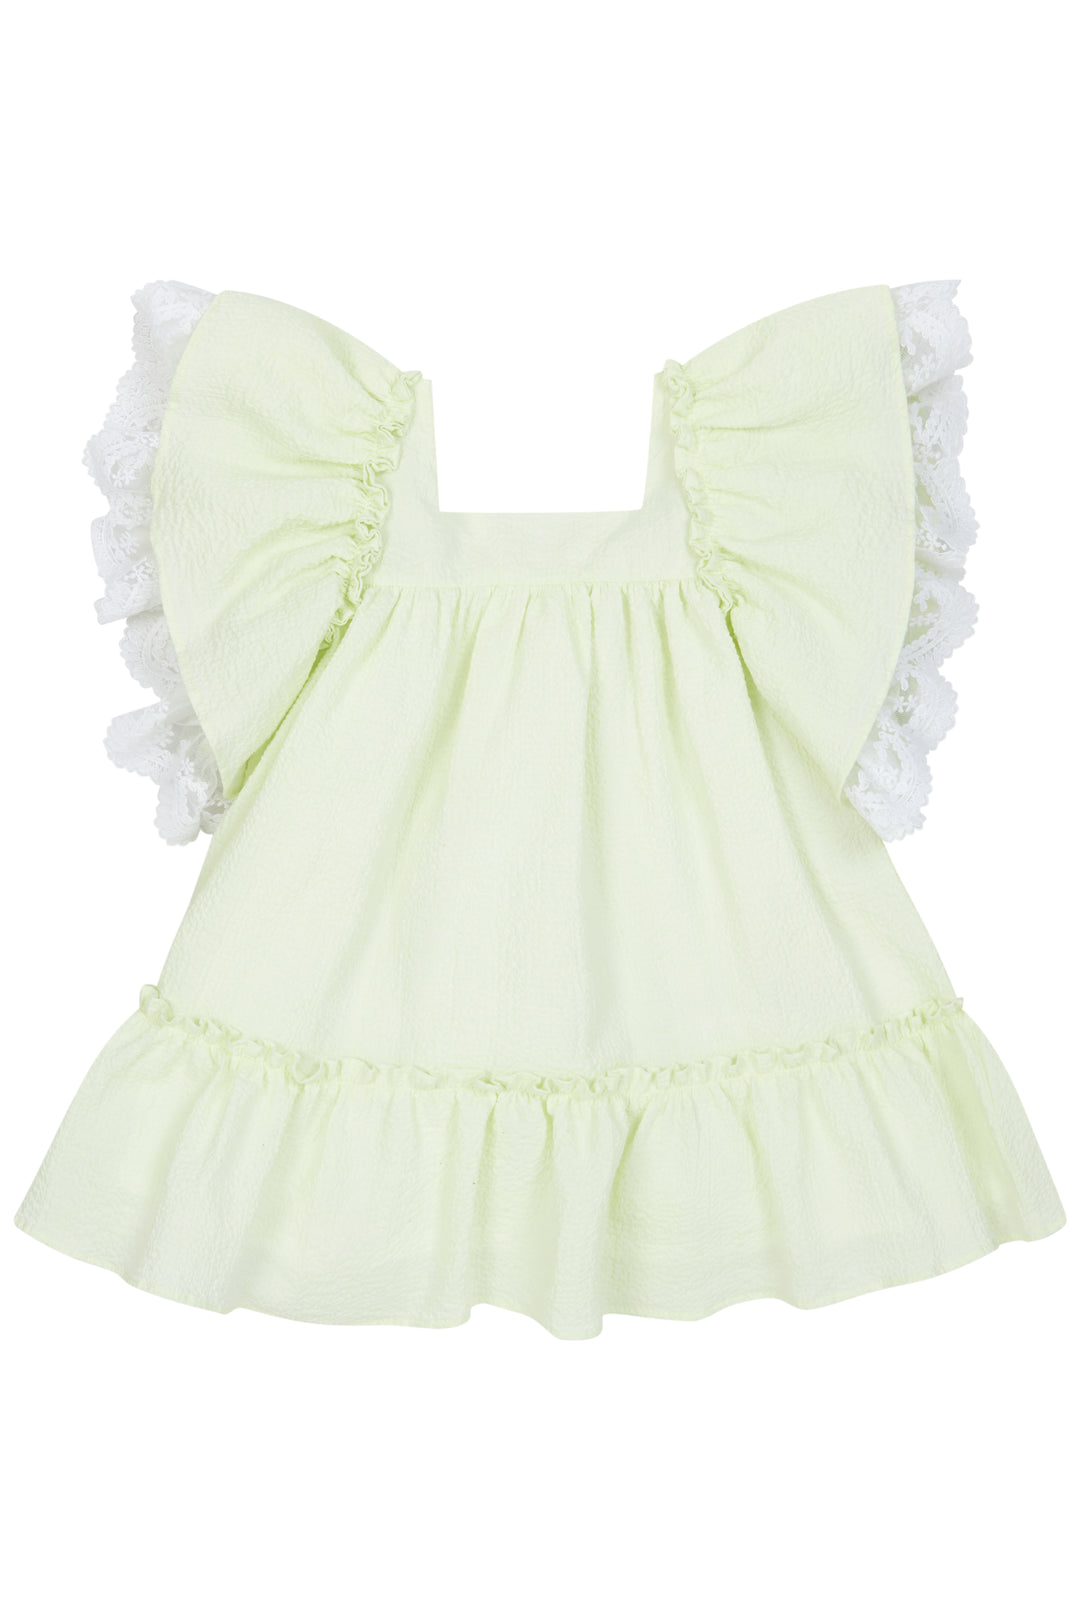 Deolinda PREORDER "Athena" Pale Green Lace Dress | Millie and John